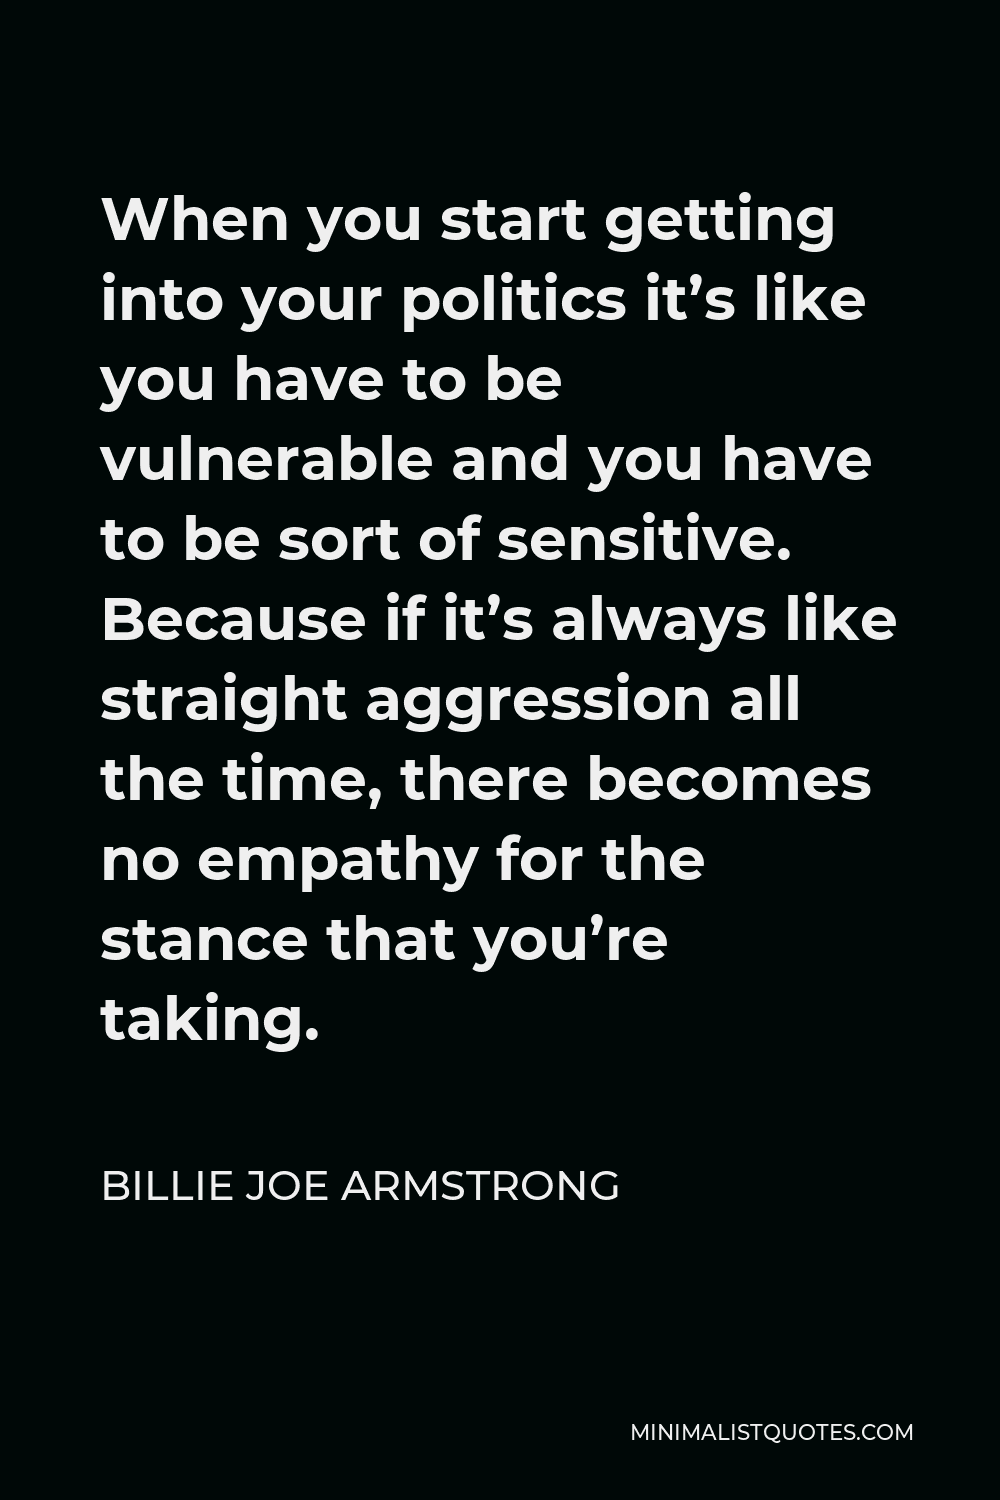 Billie Joe Armstrong Quote - When you start getting into your politics it’s like you have to be vulnerable and you have to be sort of sensitive. Because if it’s always like straight aggression all the time, there becomes no empathy for the stance that you’re taking.